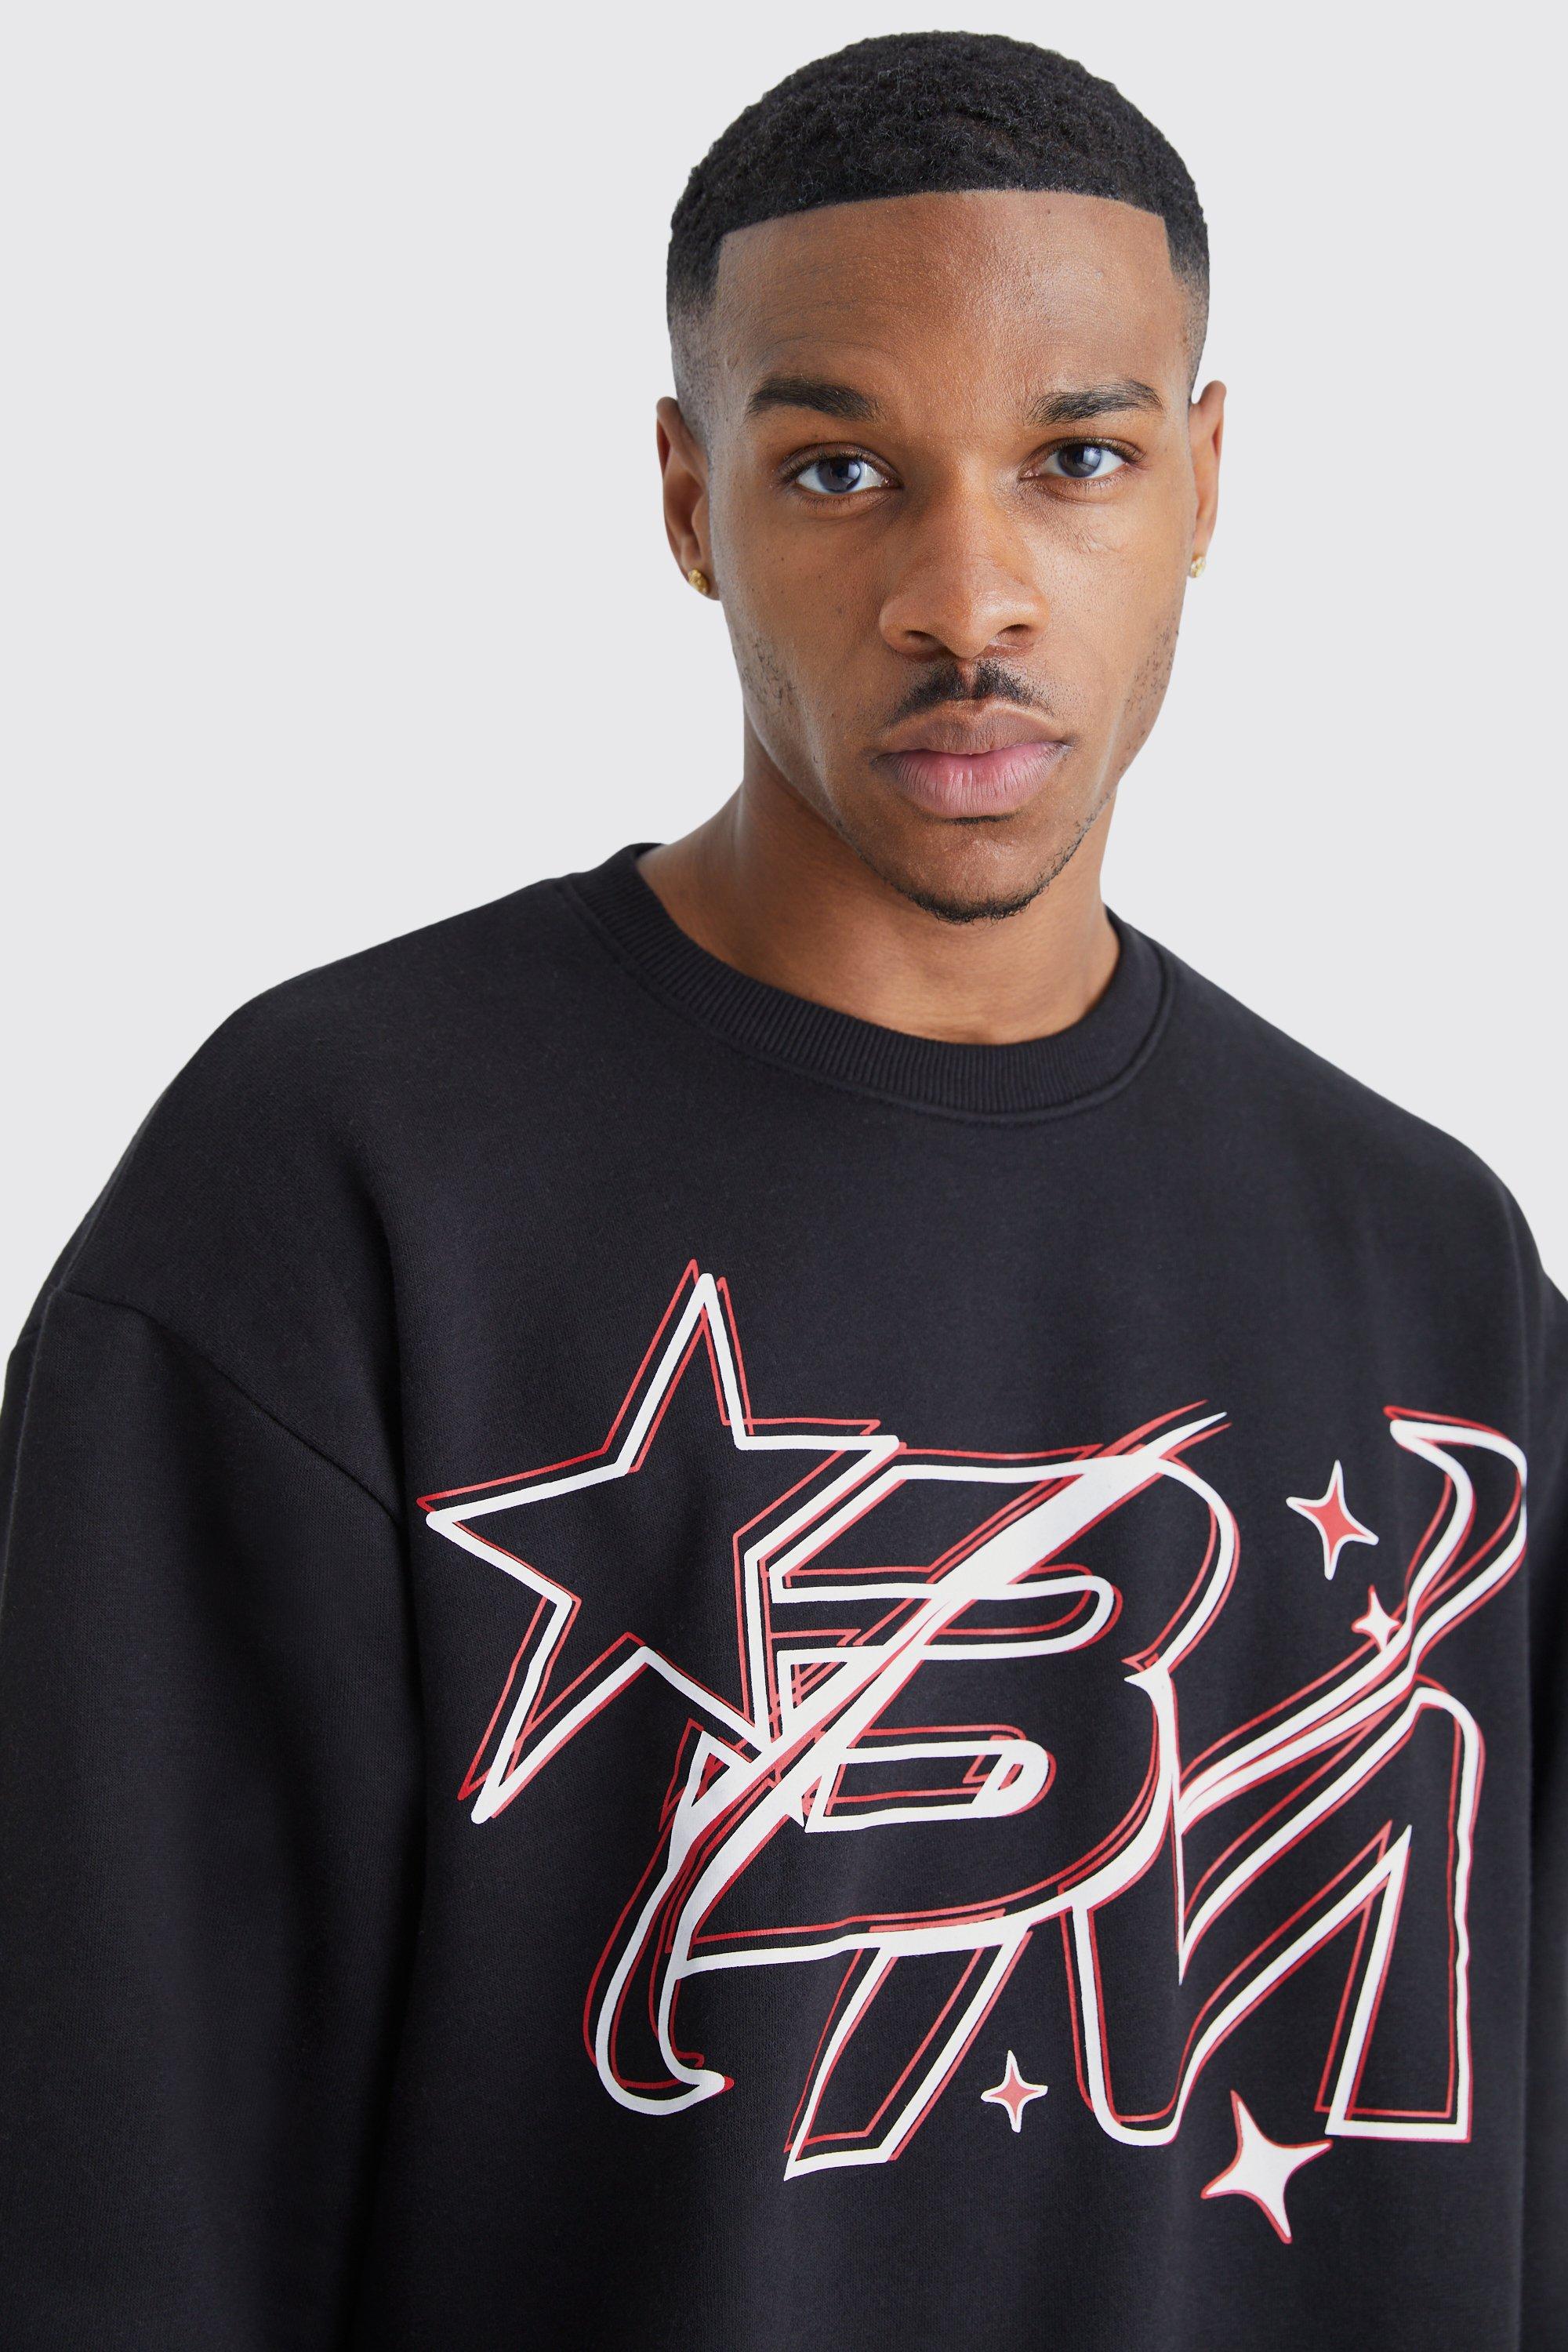 Official Sexyy Red Amiri t-shirt, hoodie, sweater, long sleeve and